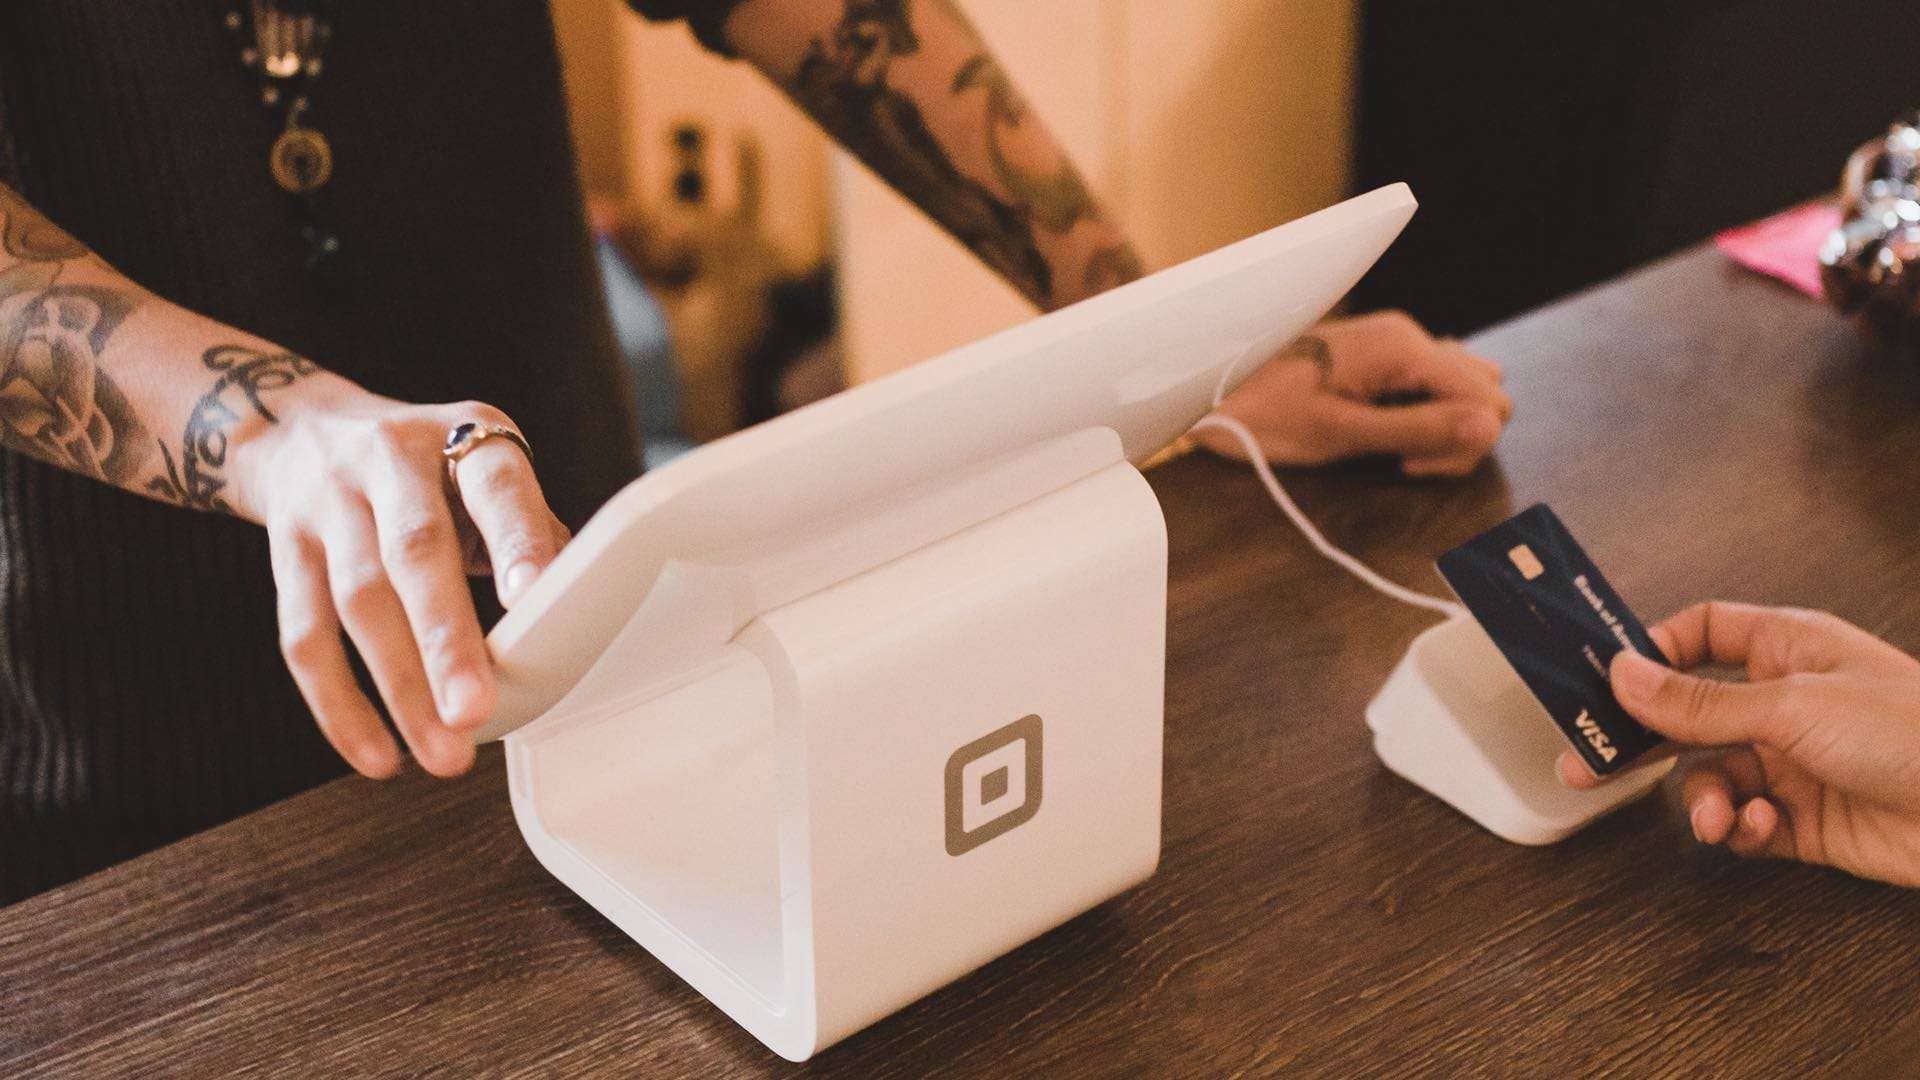 Square to sell credit card reader at Walgreens, elsewhere - CNET